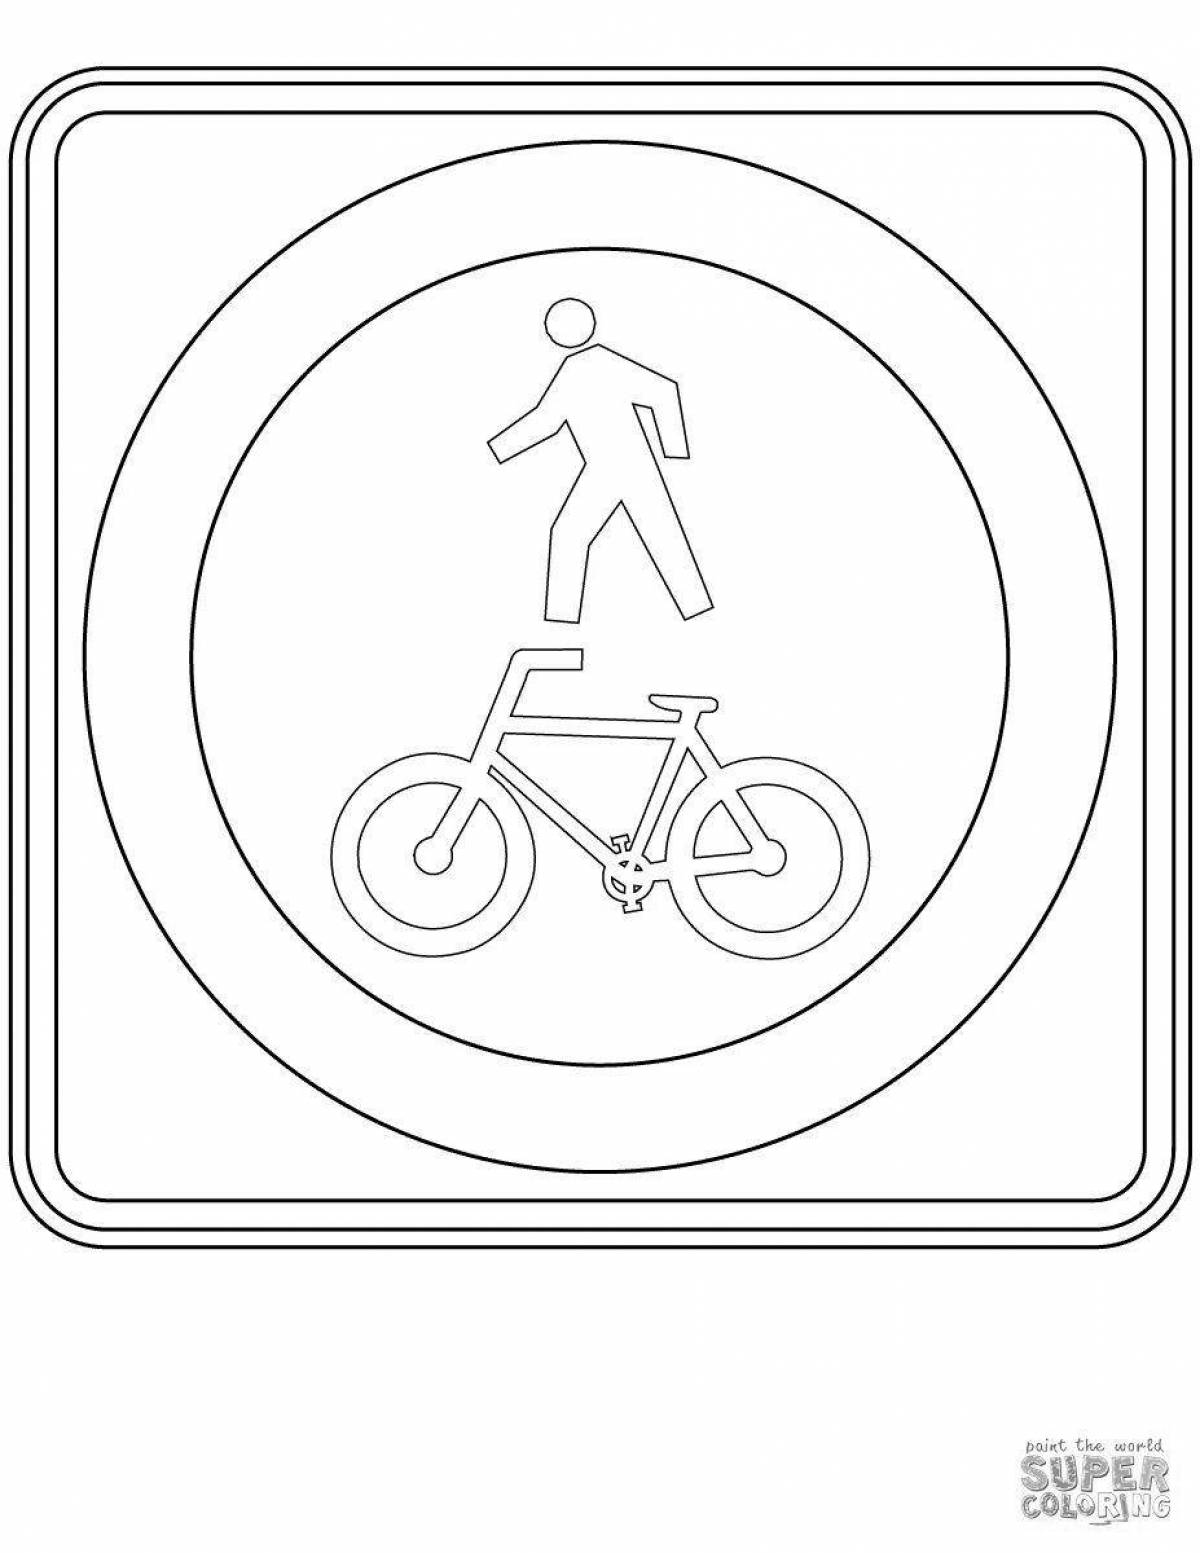 Living path coloring page